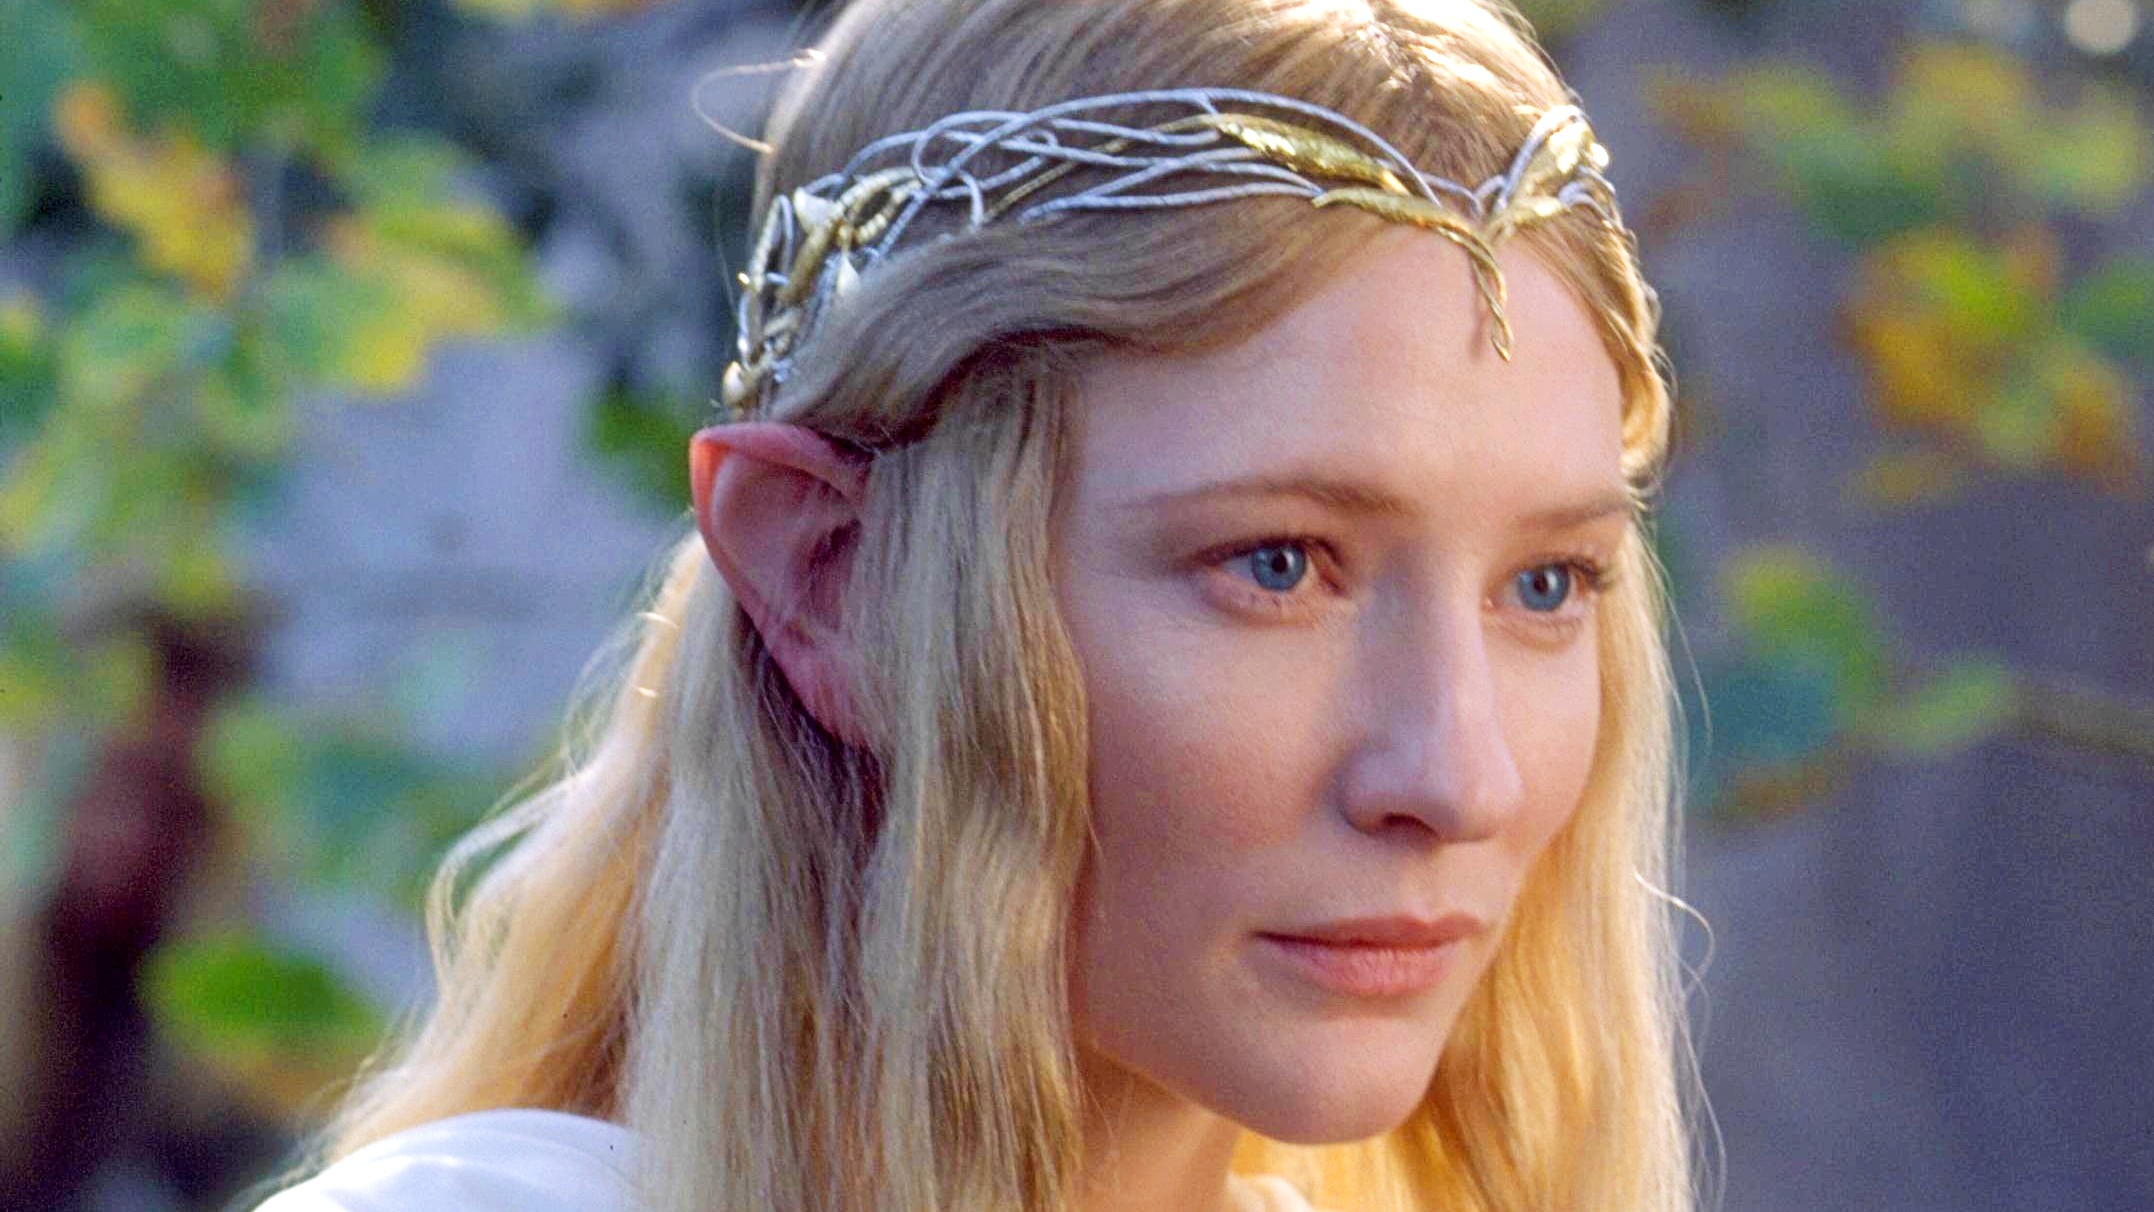 Jaar auteur Opiaat See Cate Blanchett's Replacement In Amazon's Lord of the Rings Series